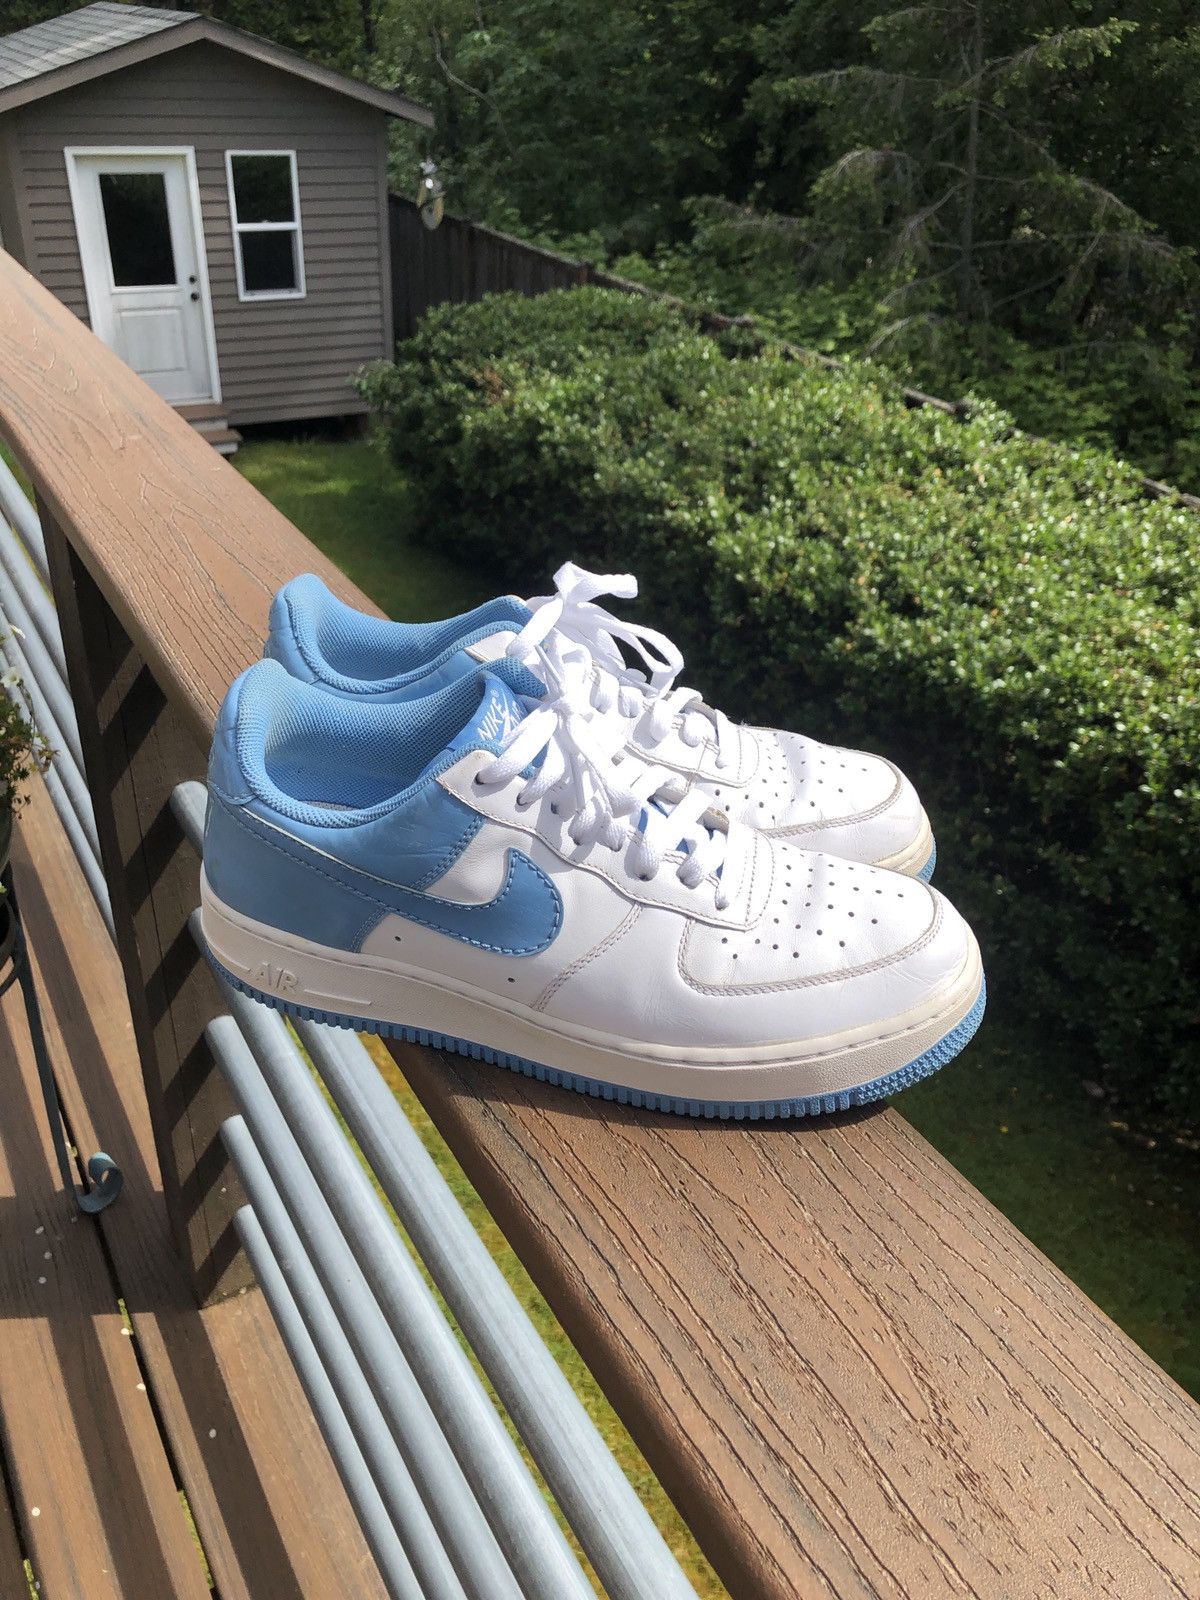 Pre-owned Nike X Vintage 2007 Air Force 1 Carolina Patent. Super Clean Shoes